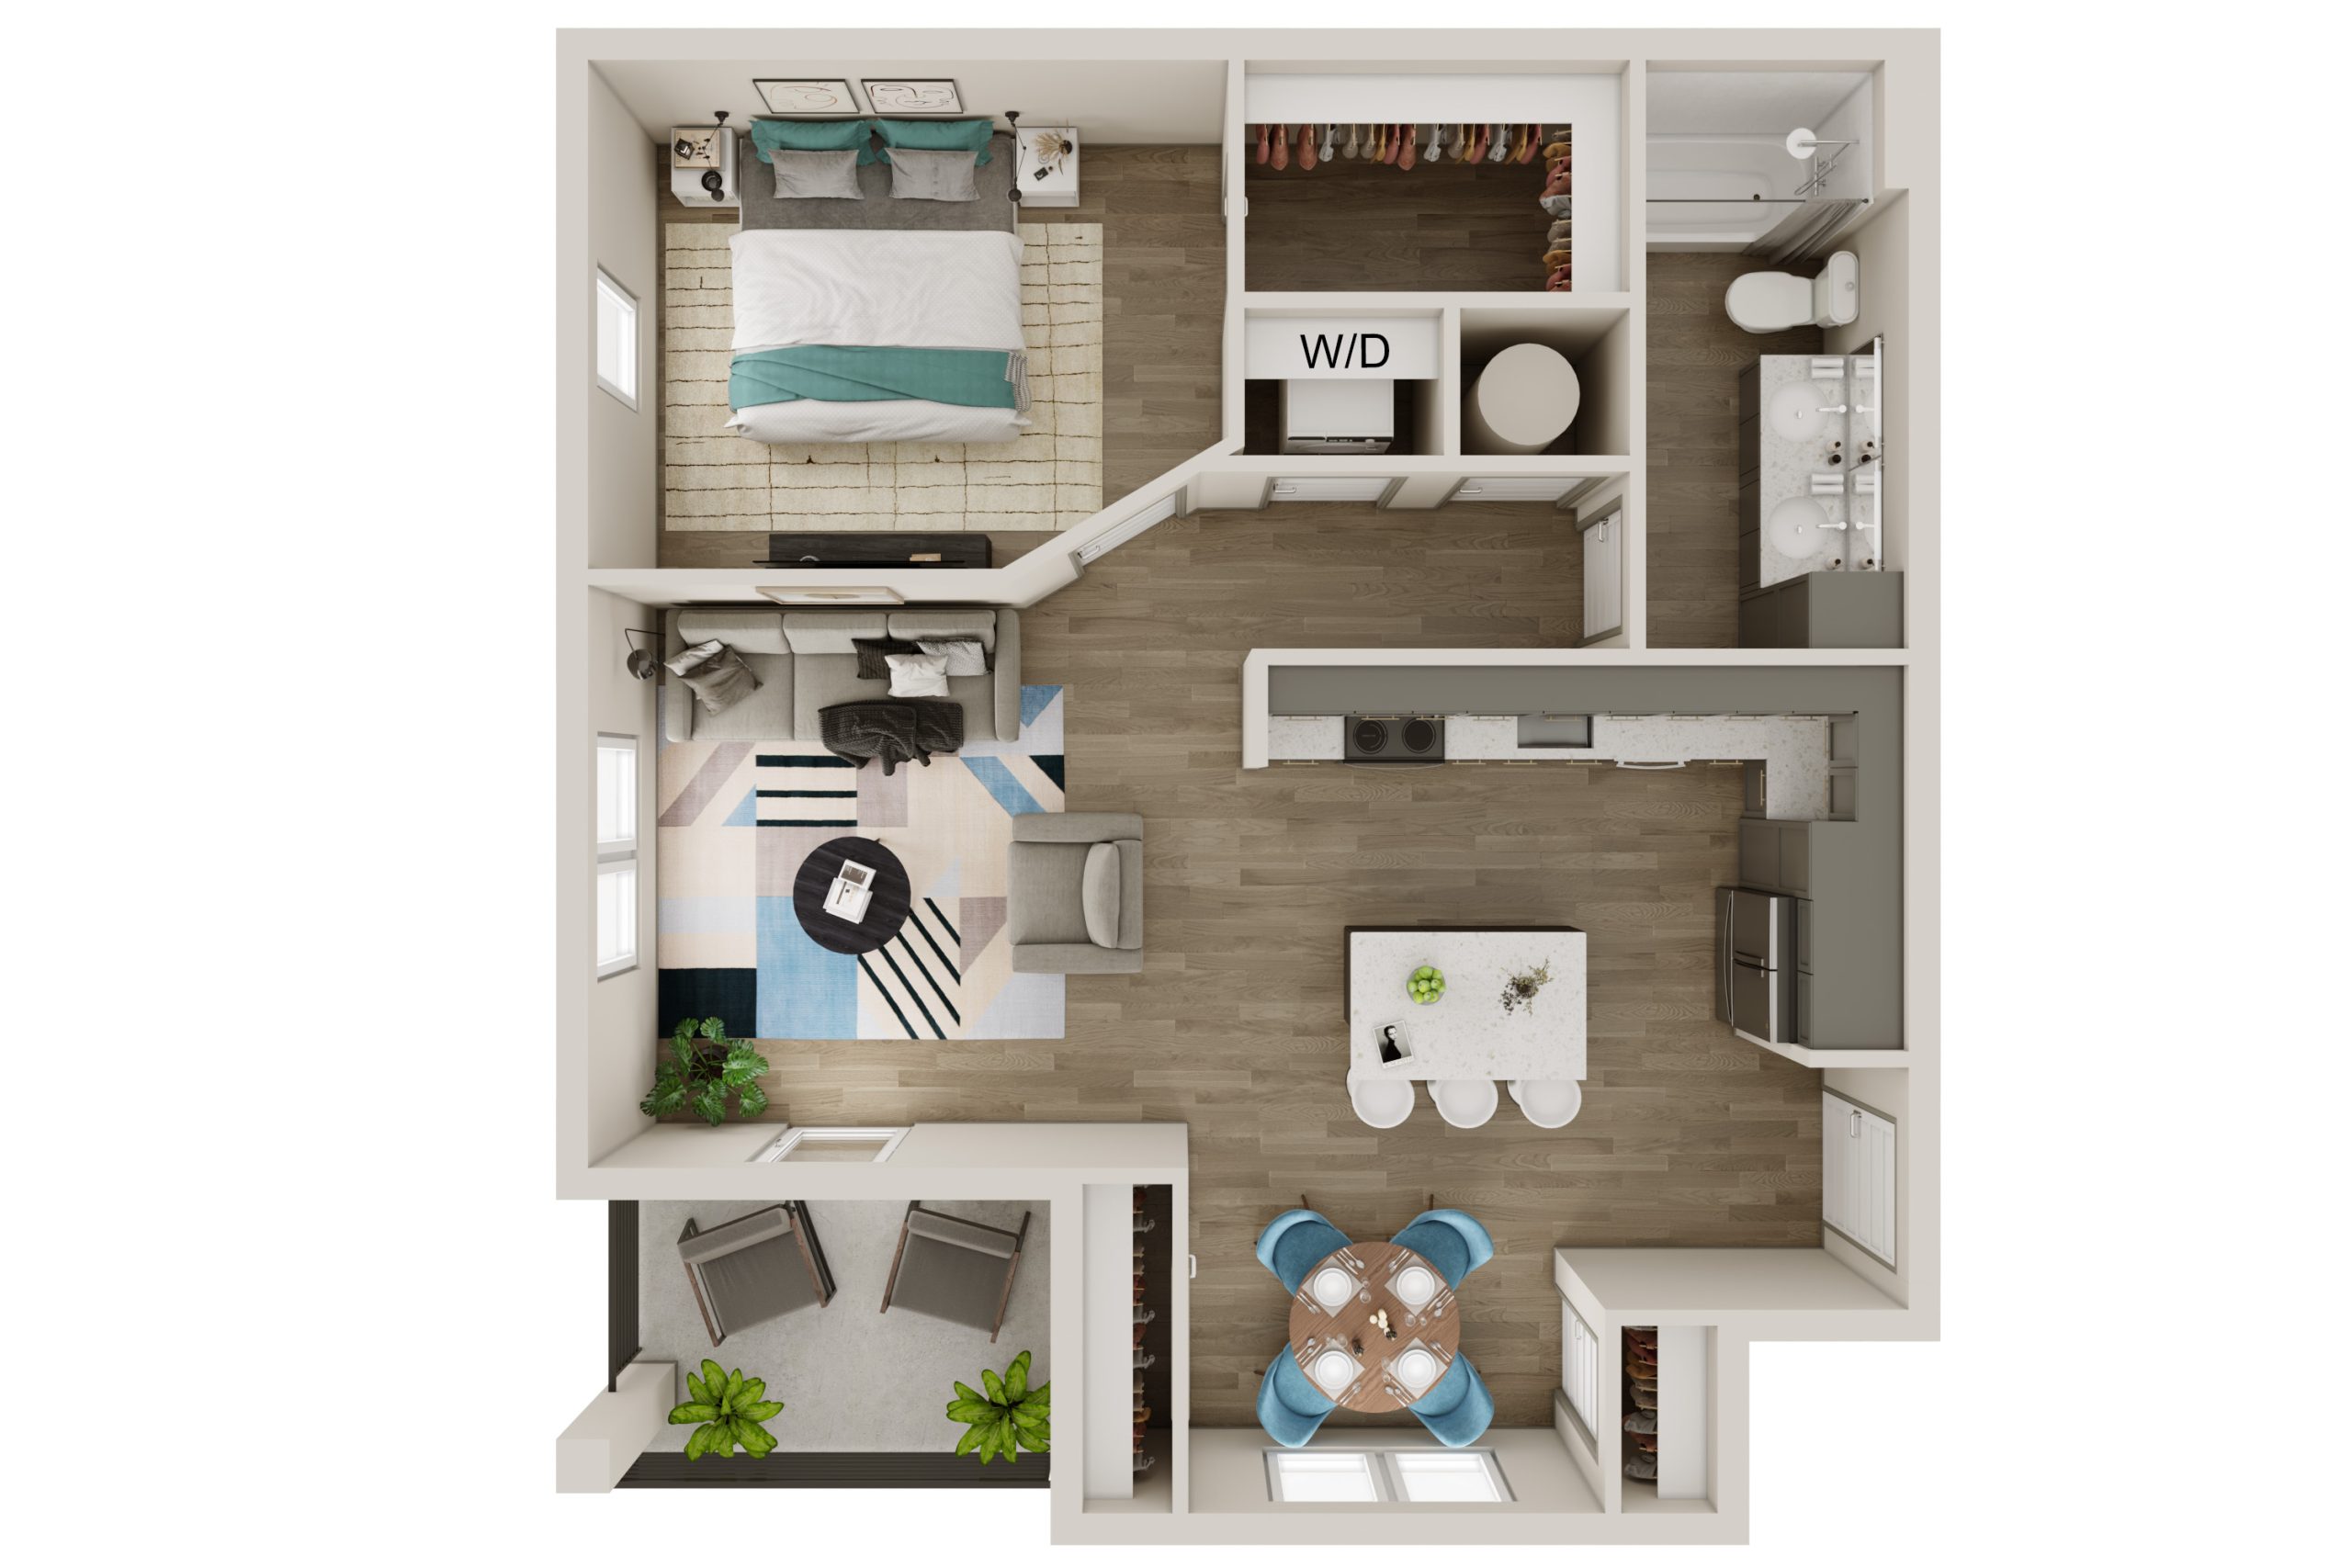 A TRUMAN unit with 1 Bedrooms and 1 Bathrooms with area of 746 sq. ft